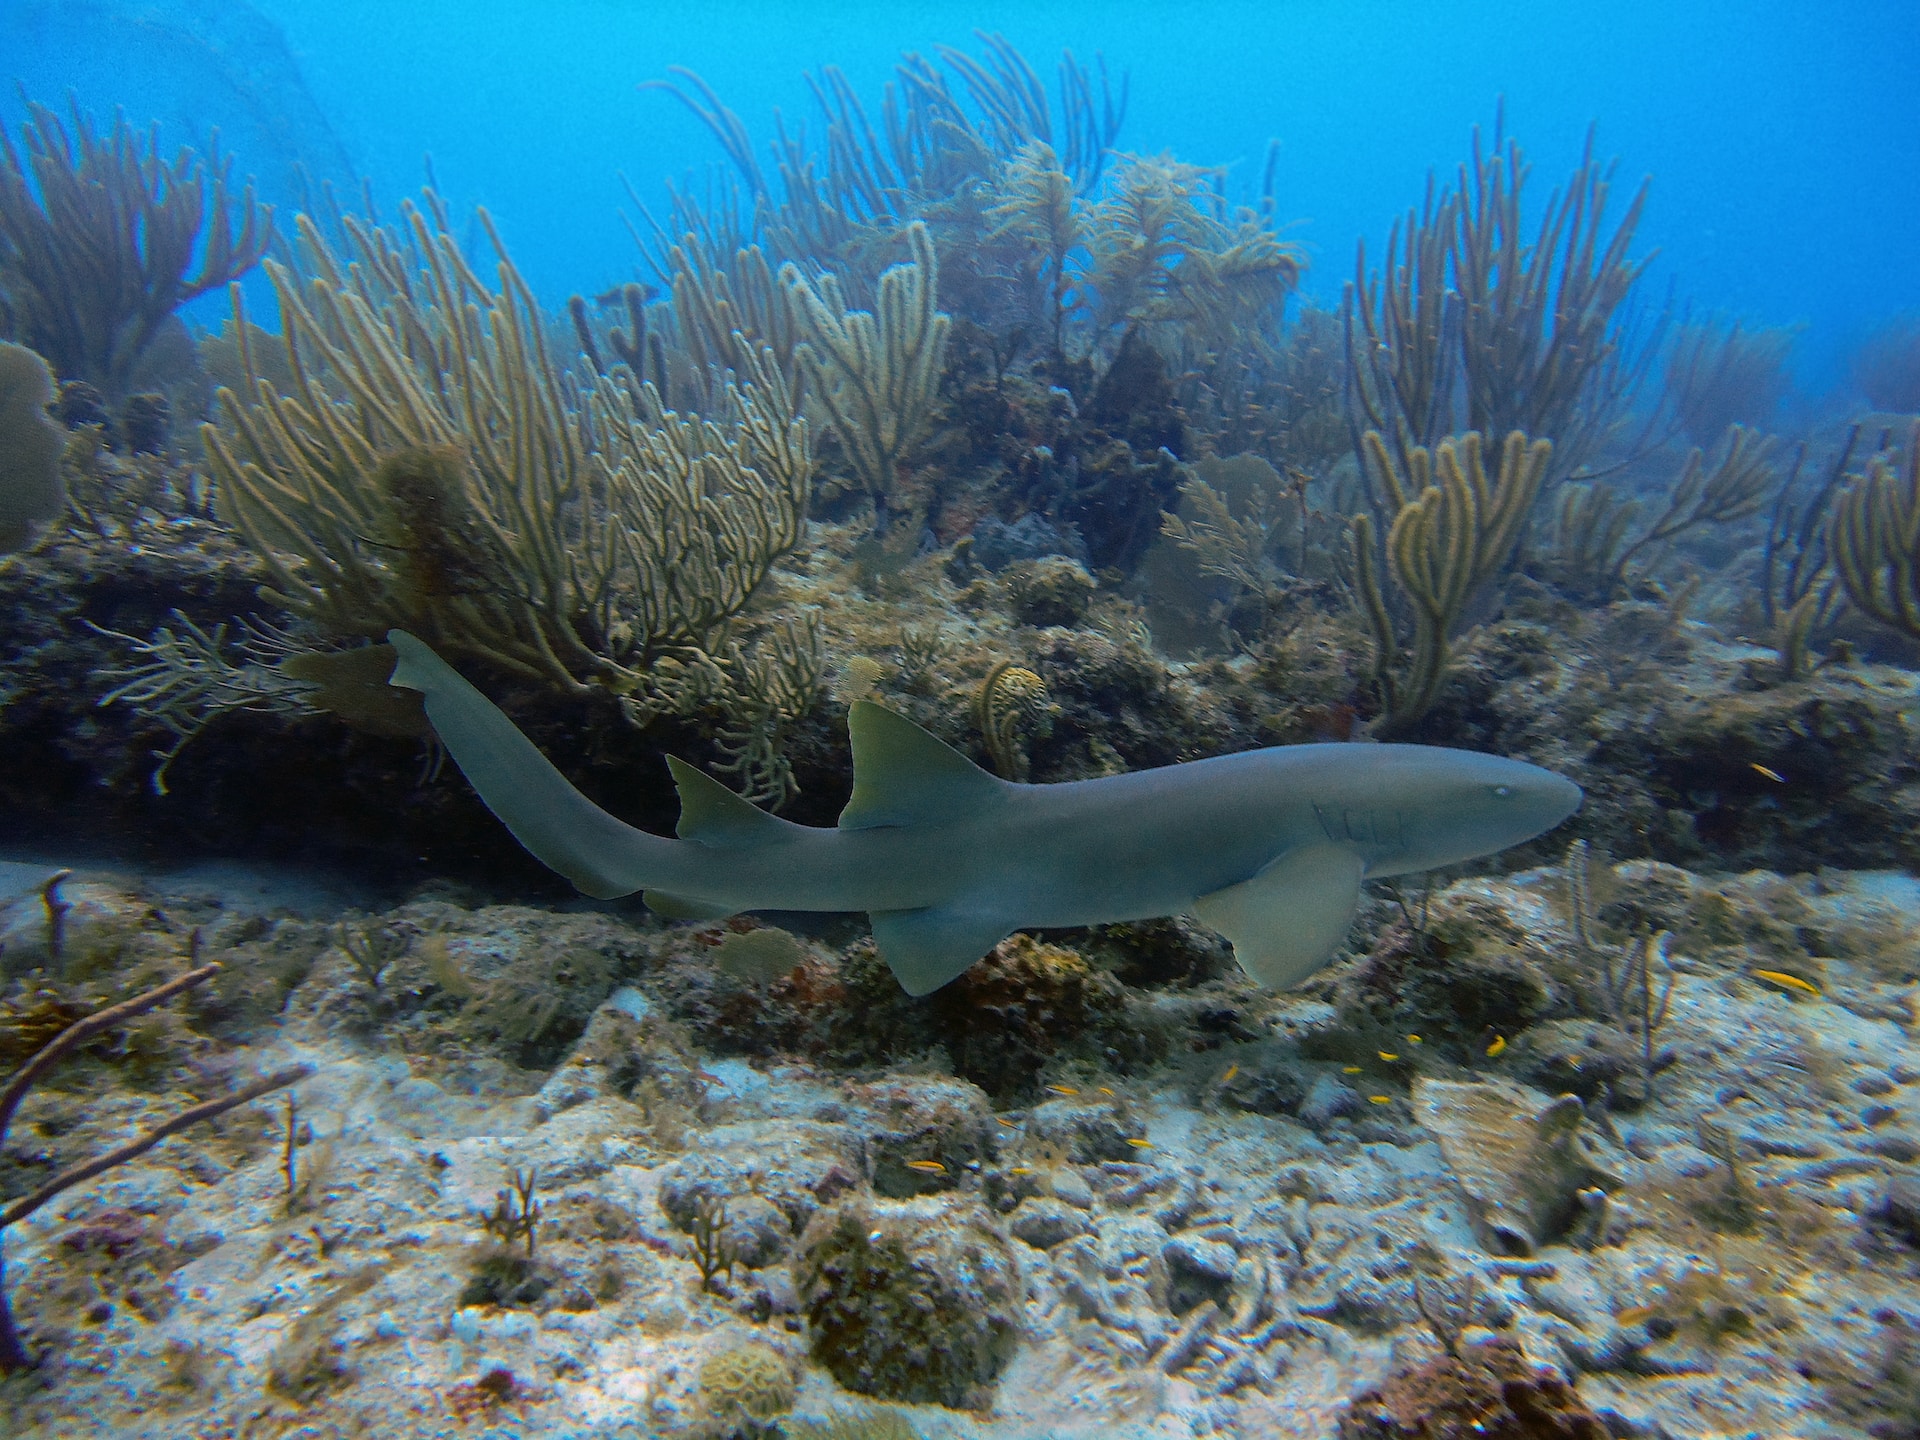 Unfortunately, nurse sharks have become very rare in Thailand. Overfishing, loss of habitat and pollution have decimated their population. Photo: Unsplash